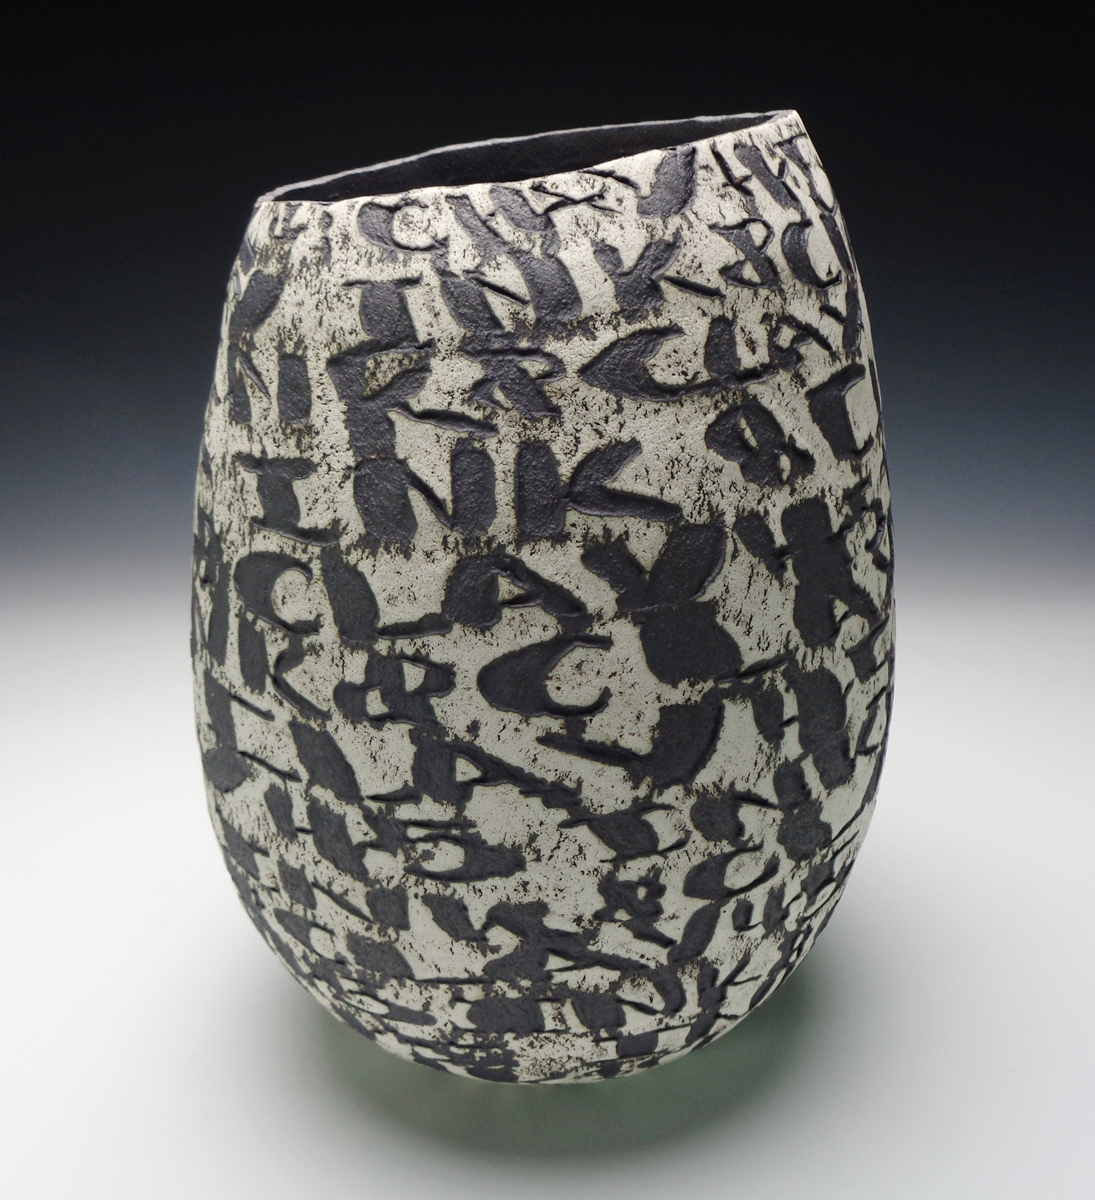 Mark Hendrickson ceramic vessel with Ink and Clay incribed horizontally on the surface